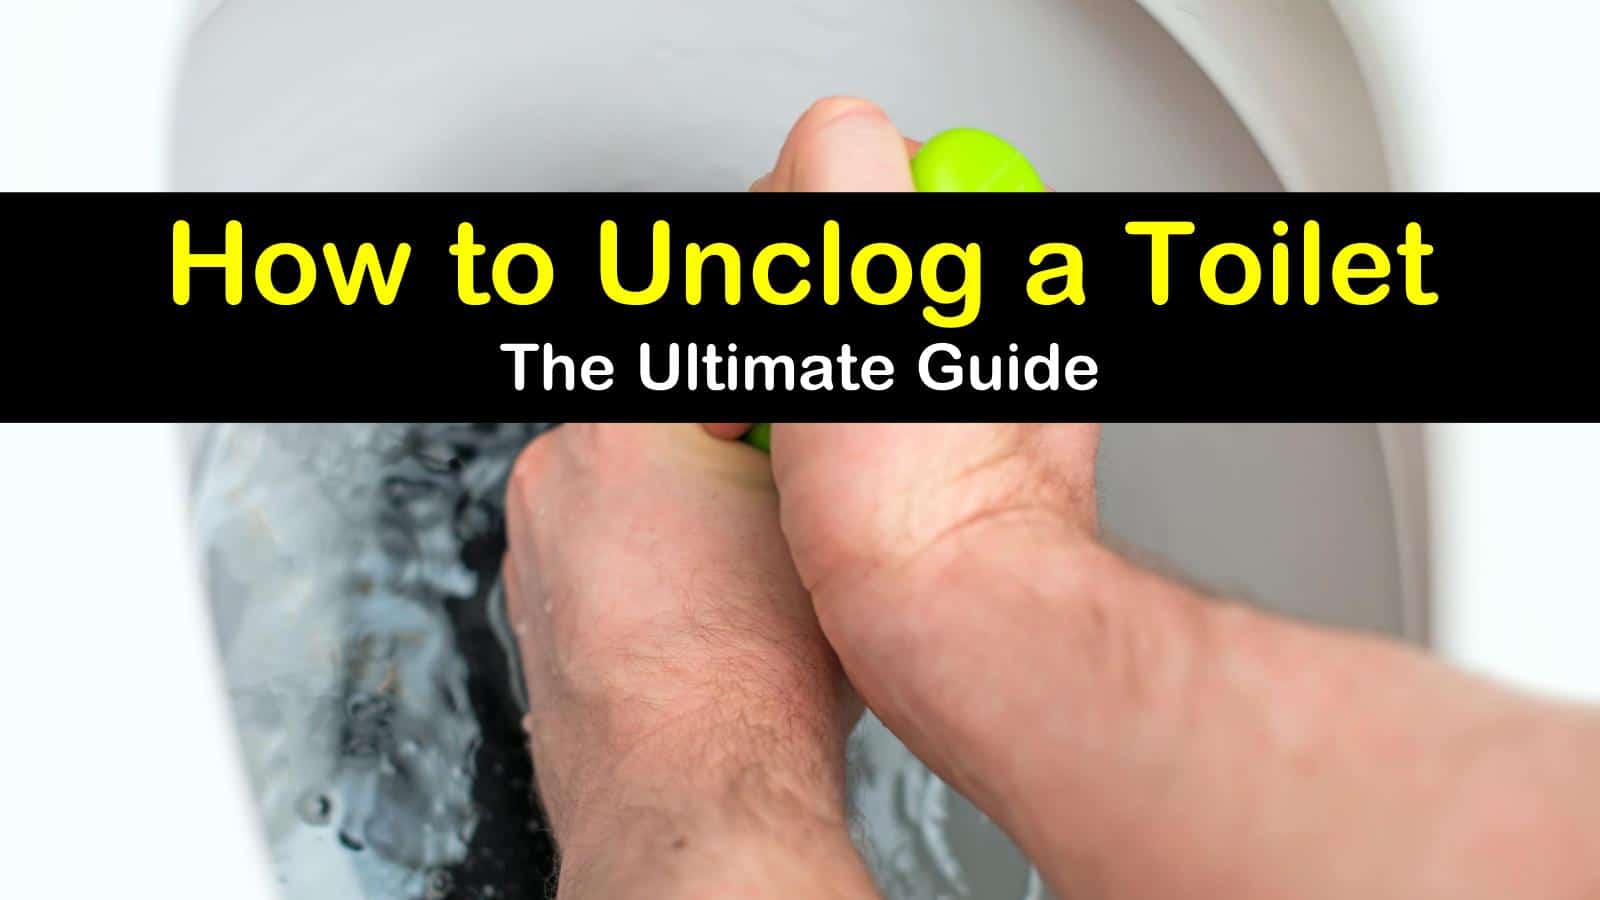 how to unclog a toilet titleimg1